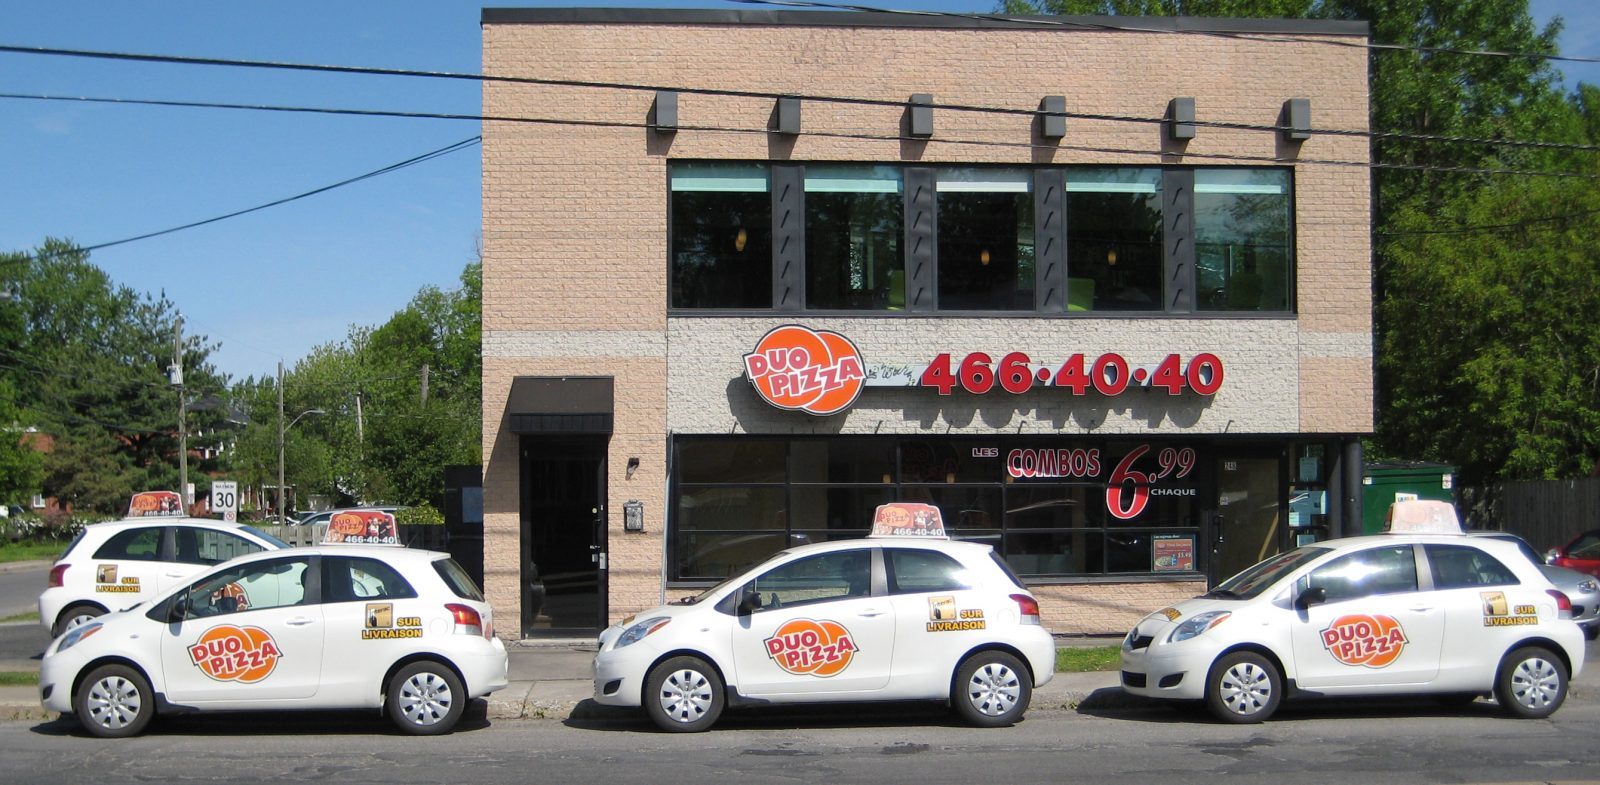 Duo Pizza serving our community over 30 years